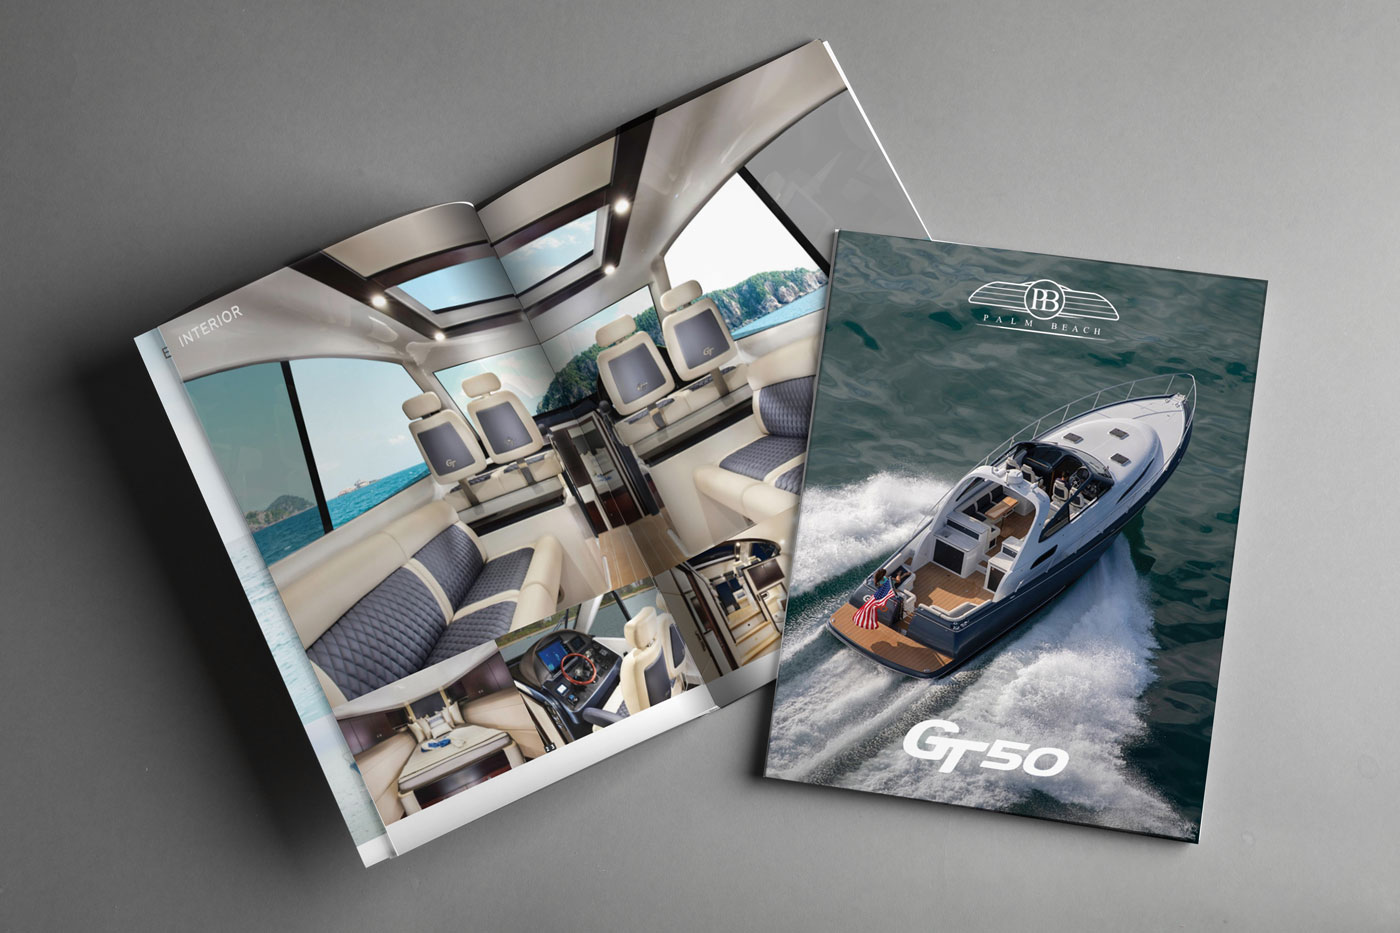 Palm Beach Motor Yachts Marketing Collateral